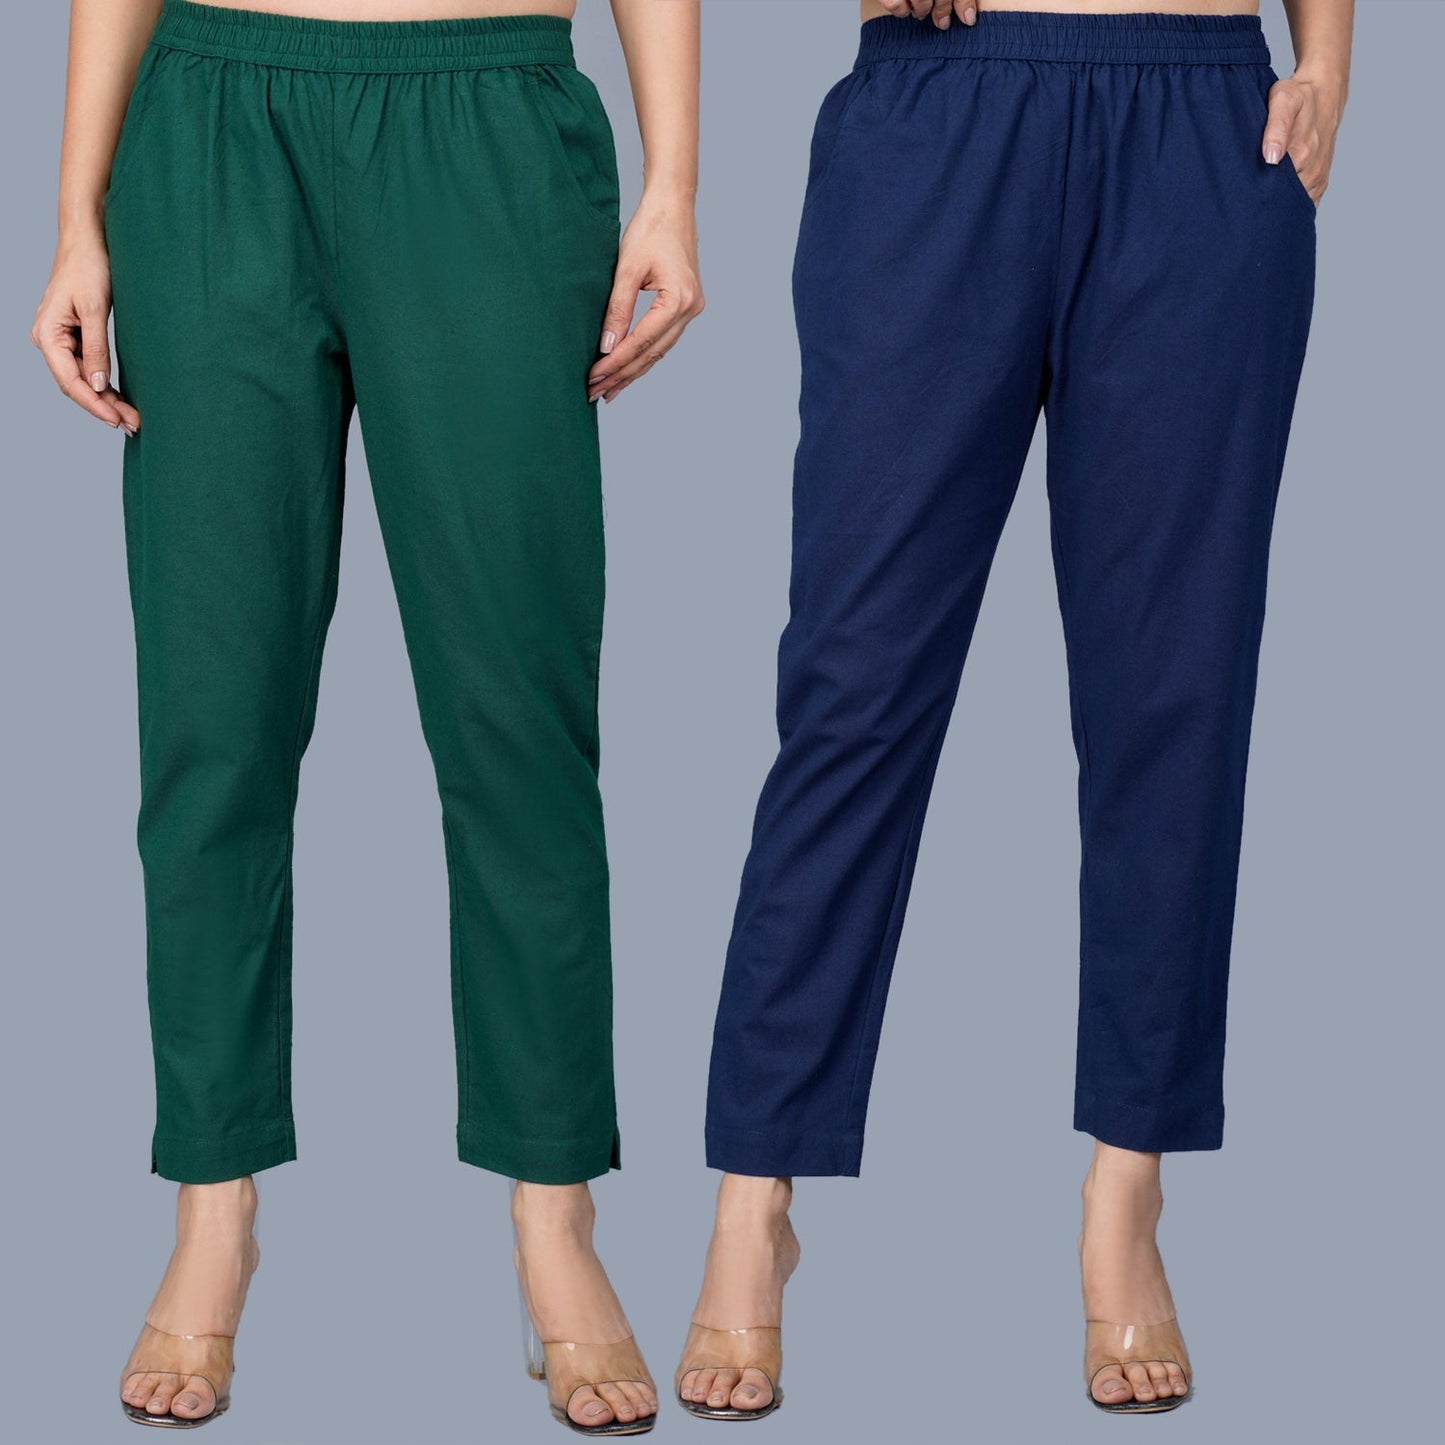 Pack Of 2 Womens Regular Fit Bottle Green And Navy Blue Fully Elastic Waistband Cotton Trouser